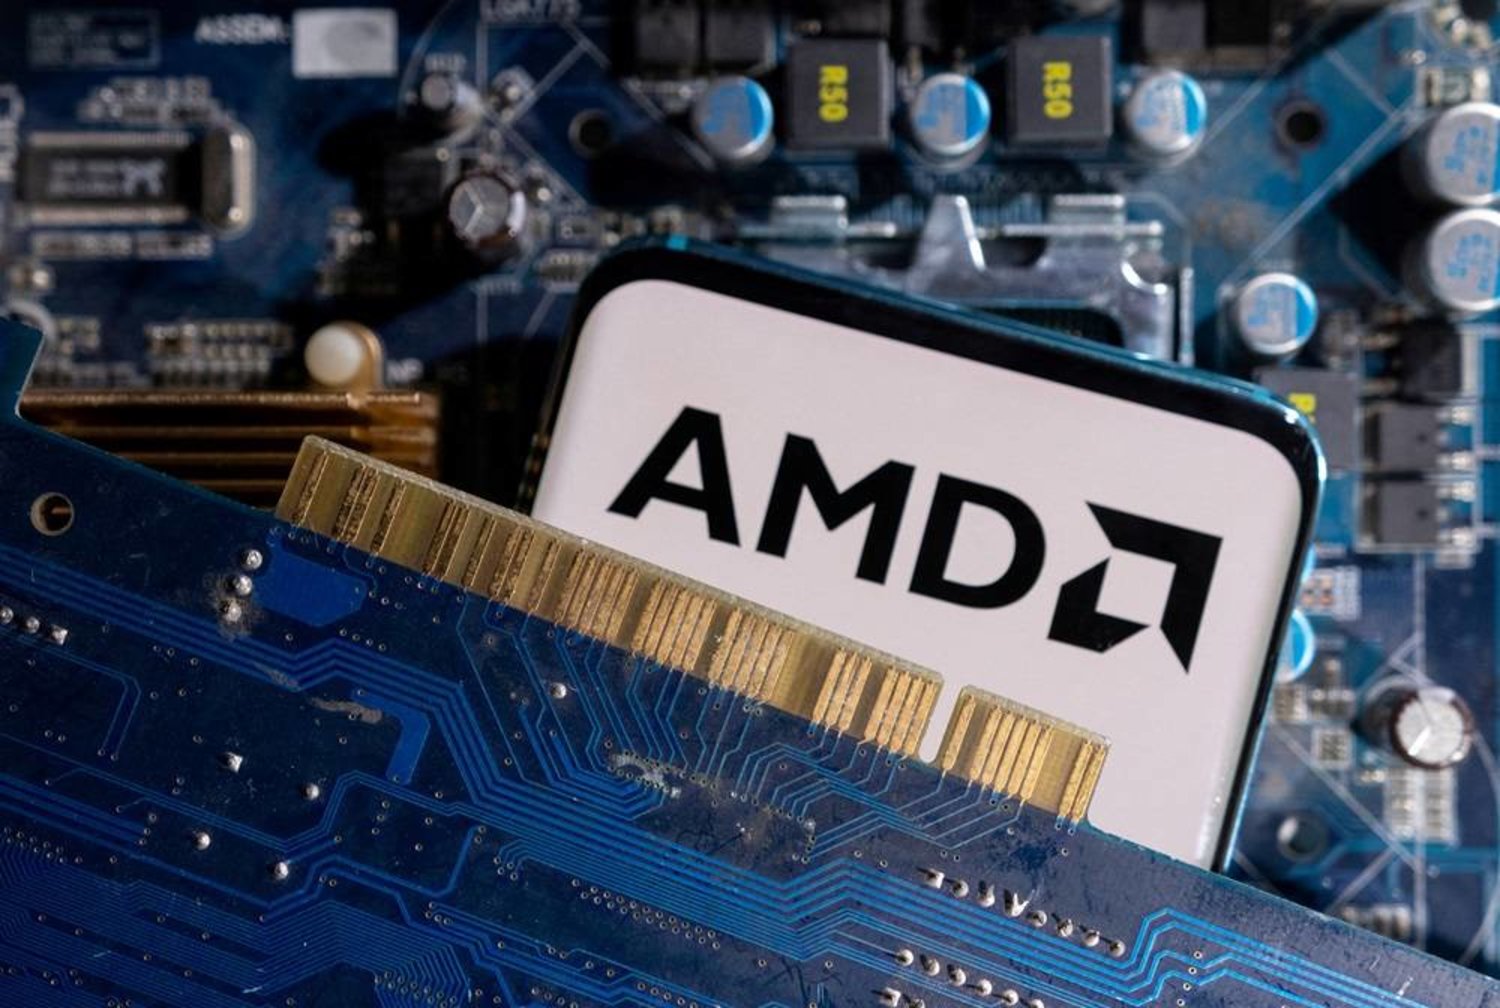 AMD unveils new AI chips to challenge market leader Nvidia